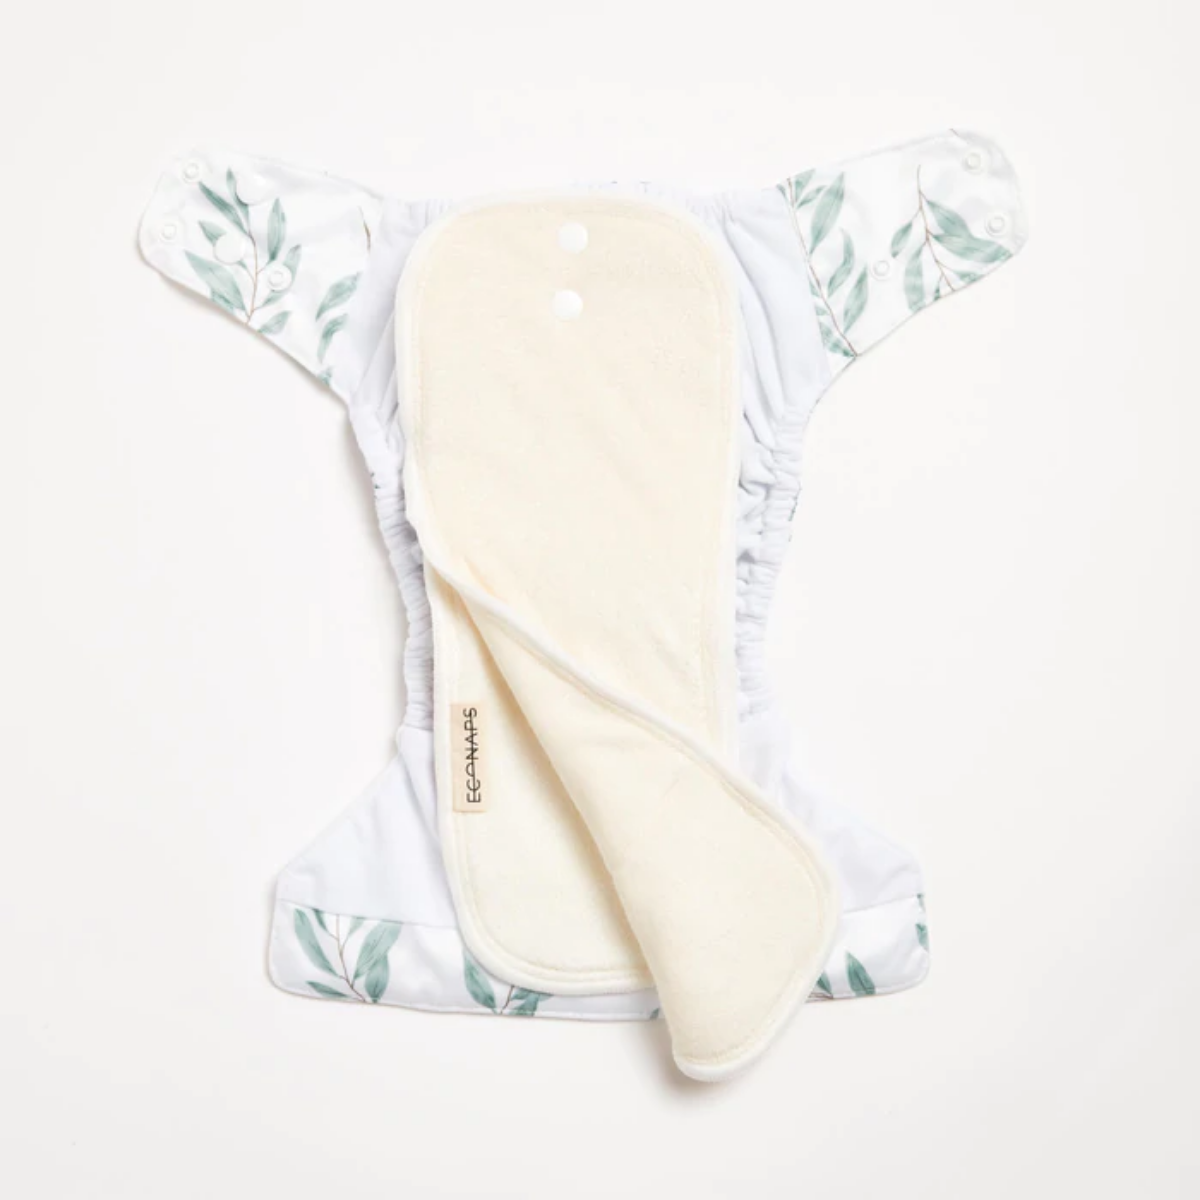 An open Olive Leaf 2.0 Modern Cloth Nappy with green olive leaves on it by EcoNaps on a white surface.